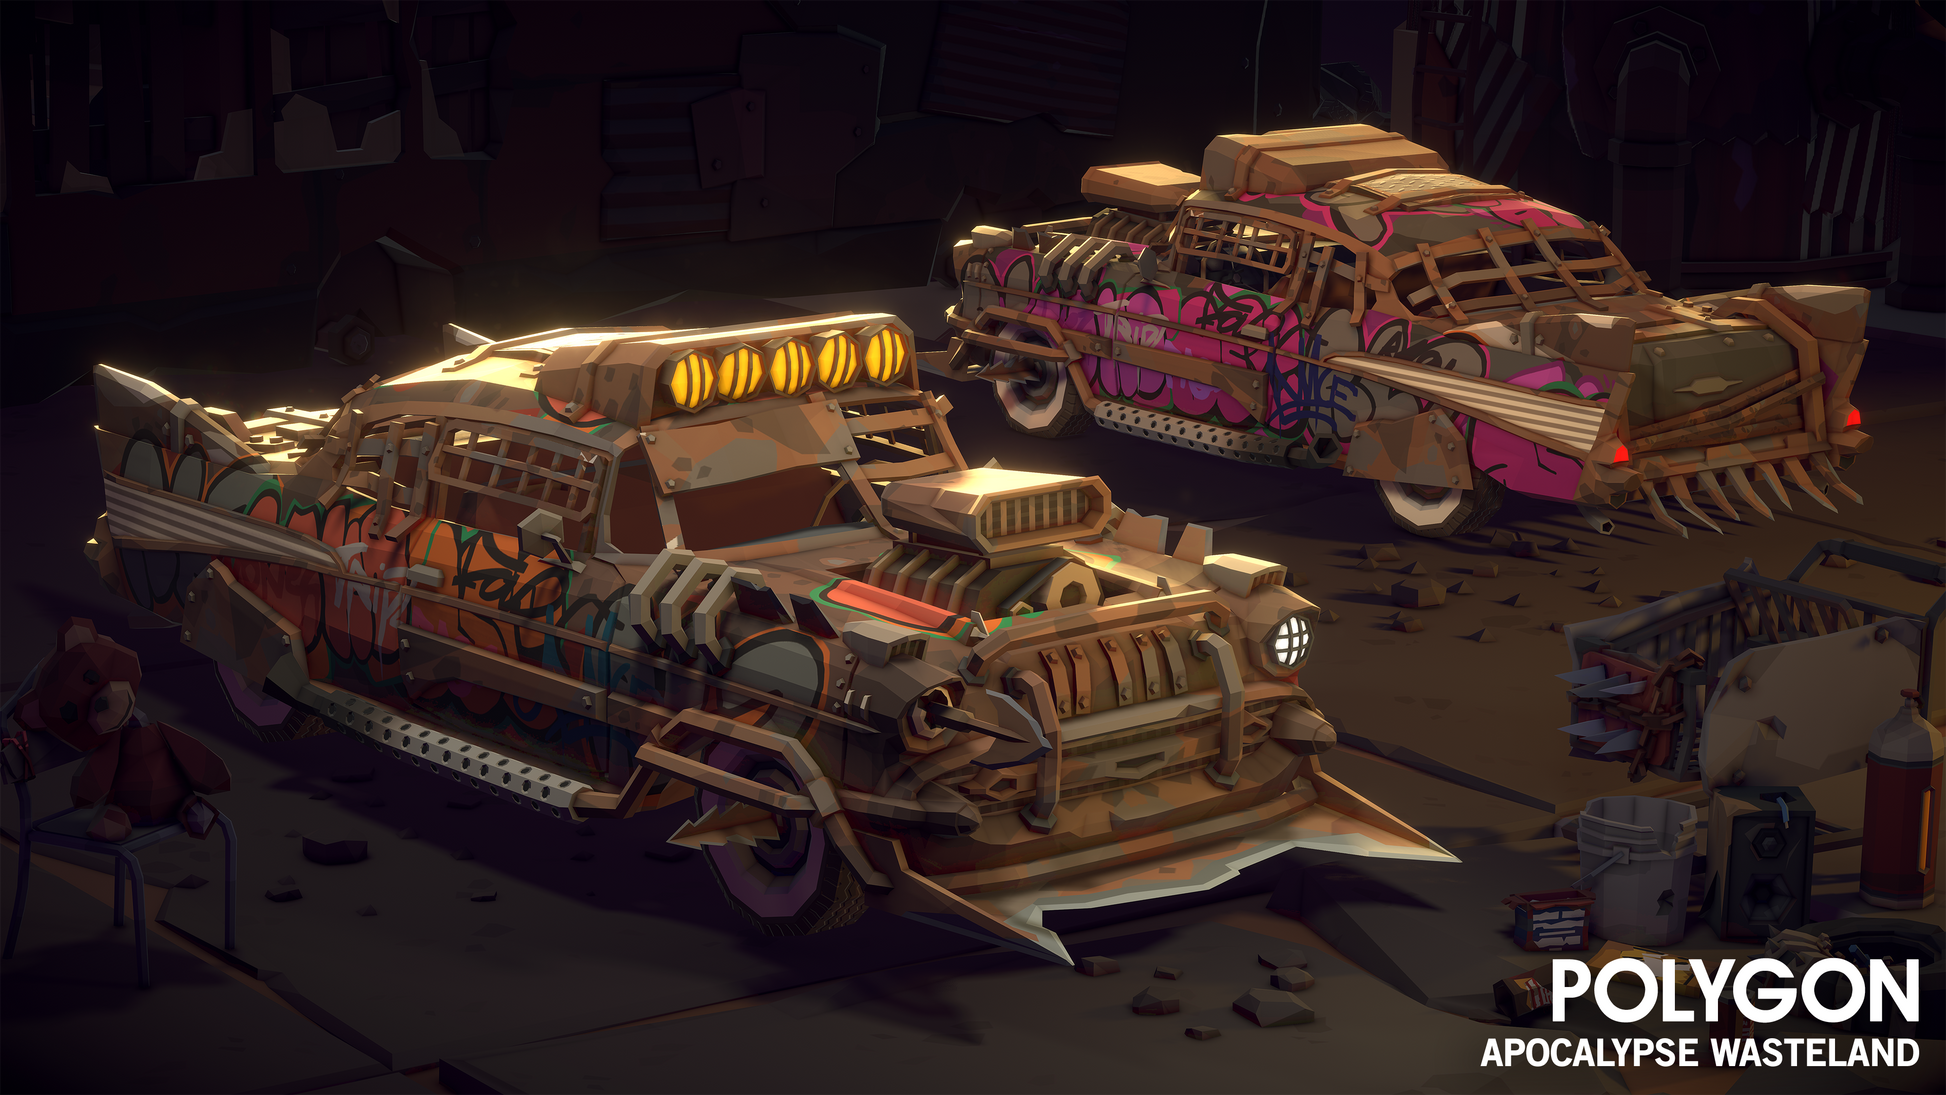 Two apocalyptic muscle cars covered in graffit and held together with scavanged steel parts